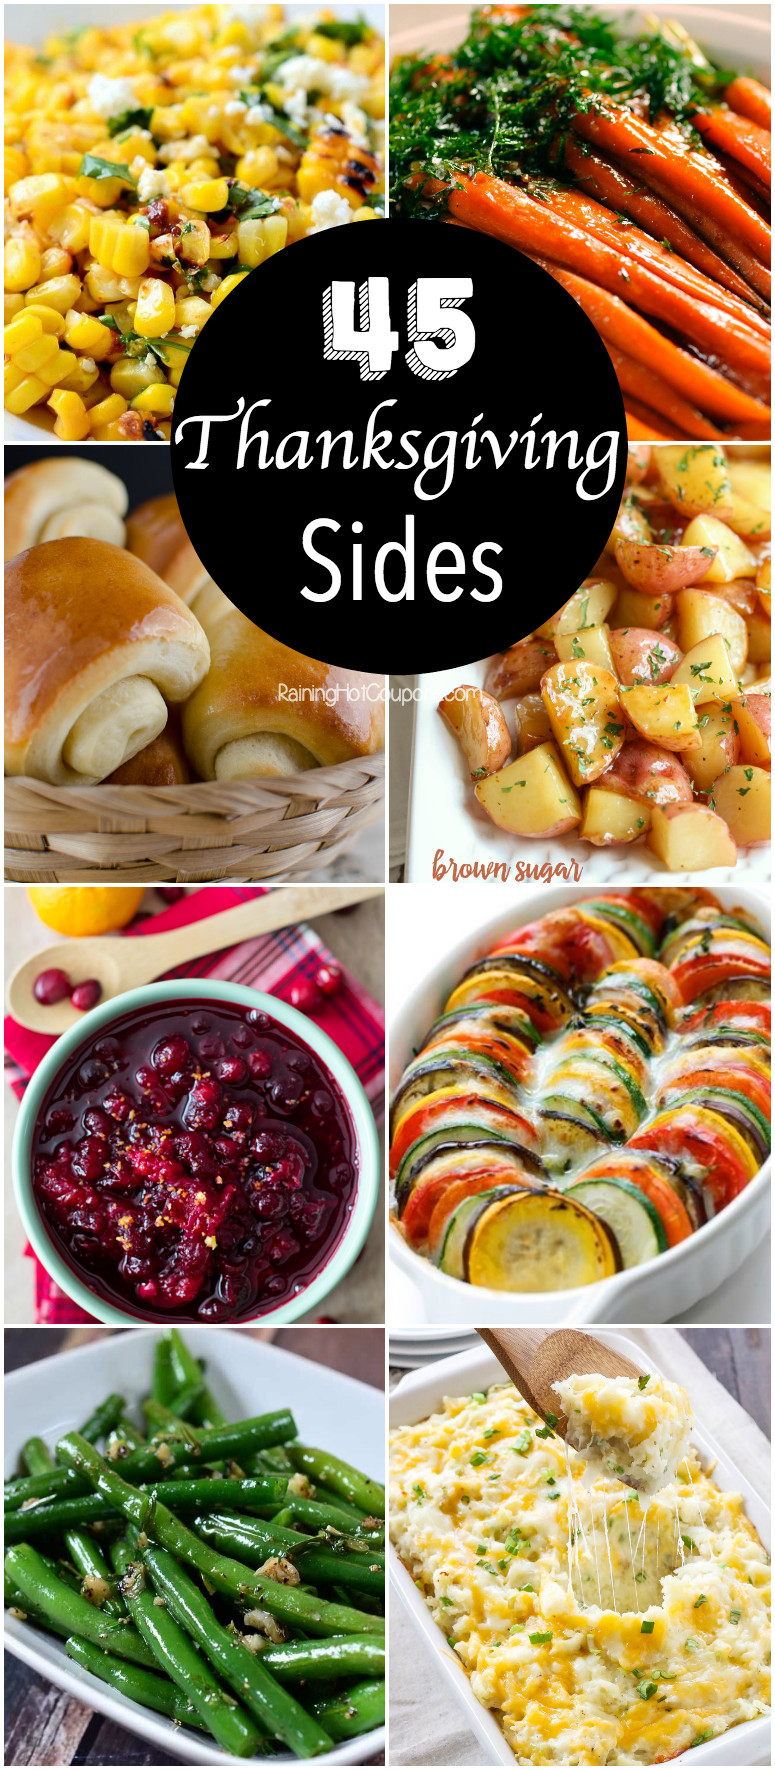 Thanksgiving Dinner Side Dishes Recipes
 45 Thanksgiving Side Dishes